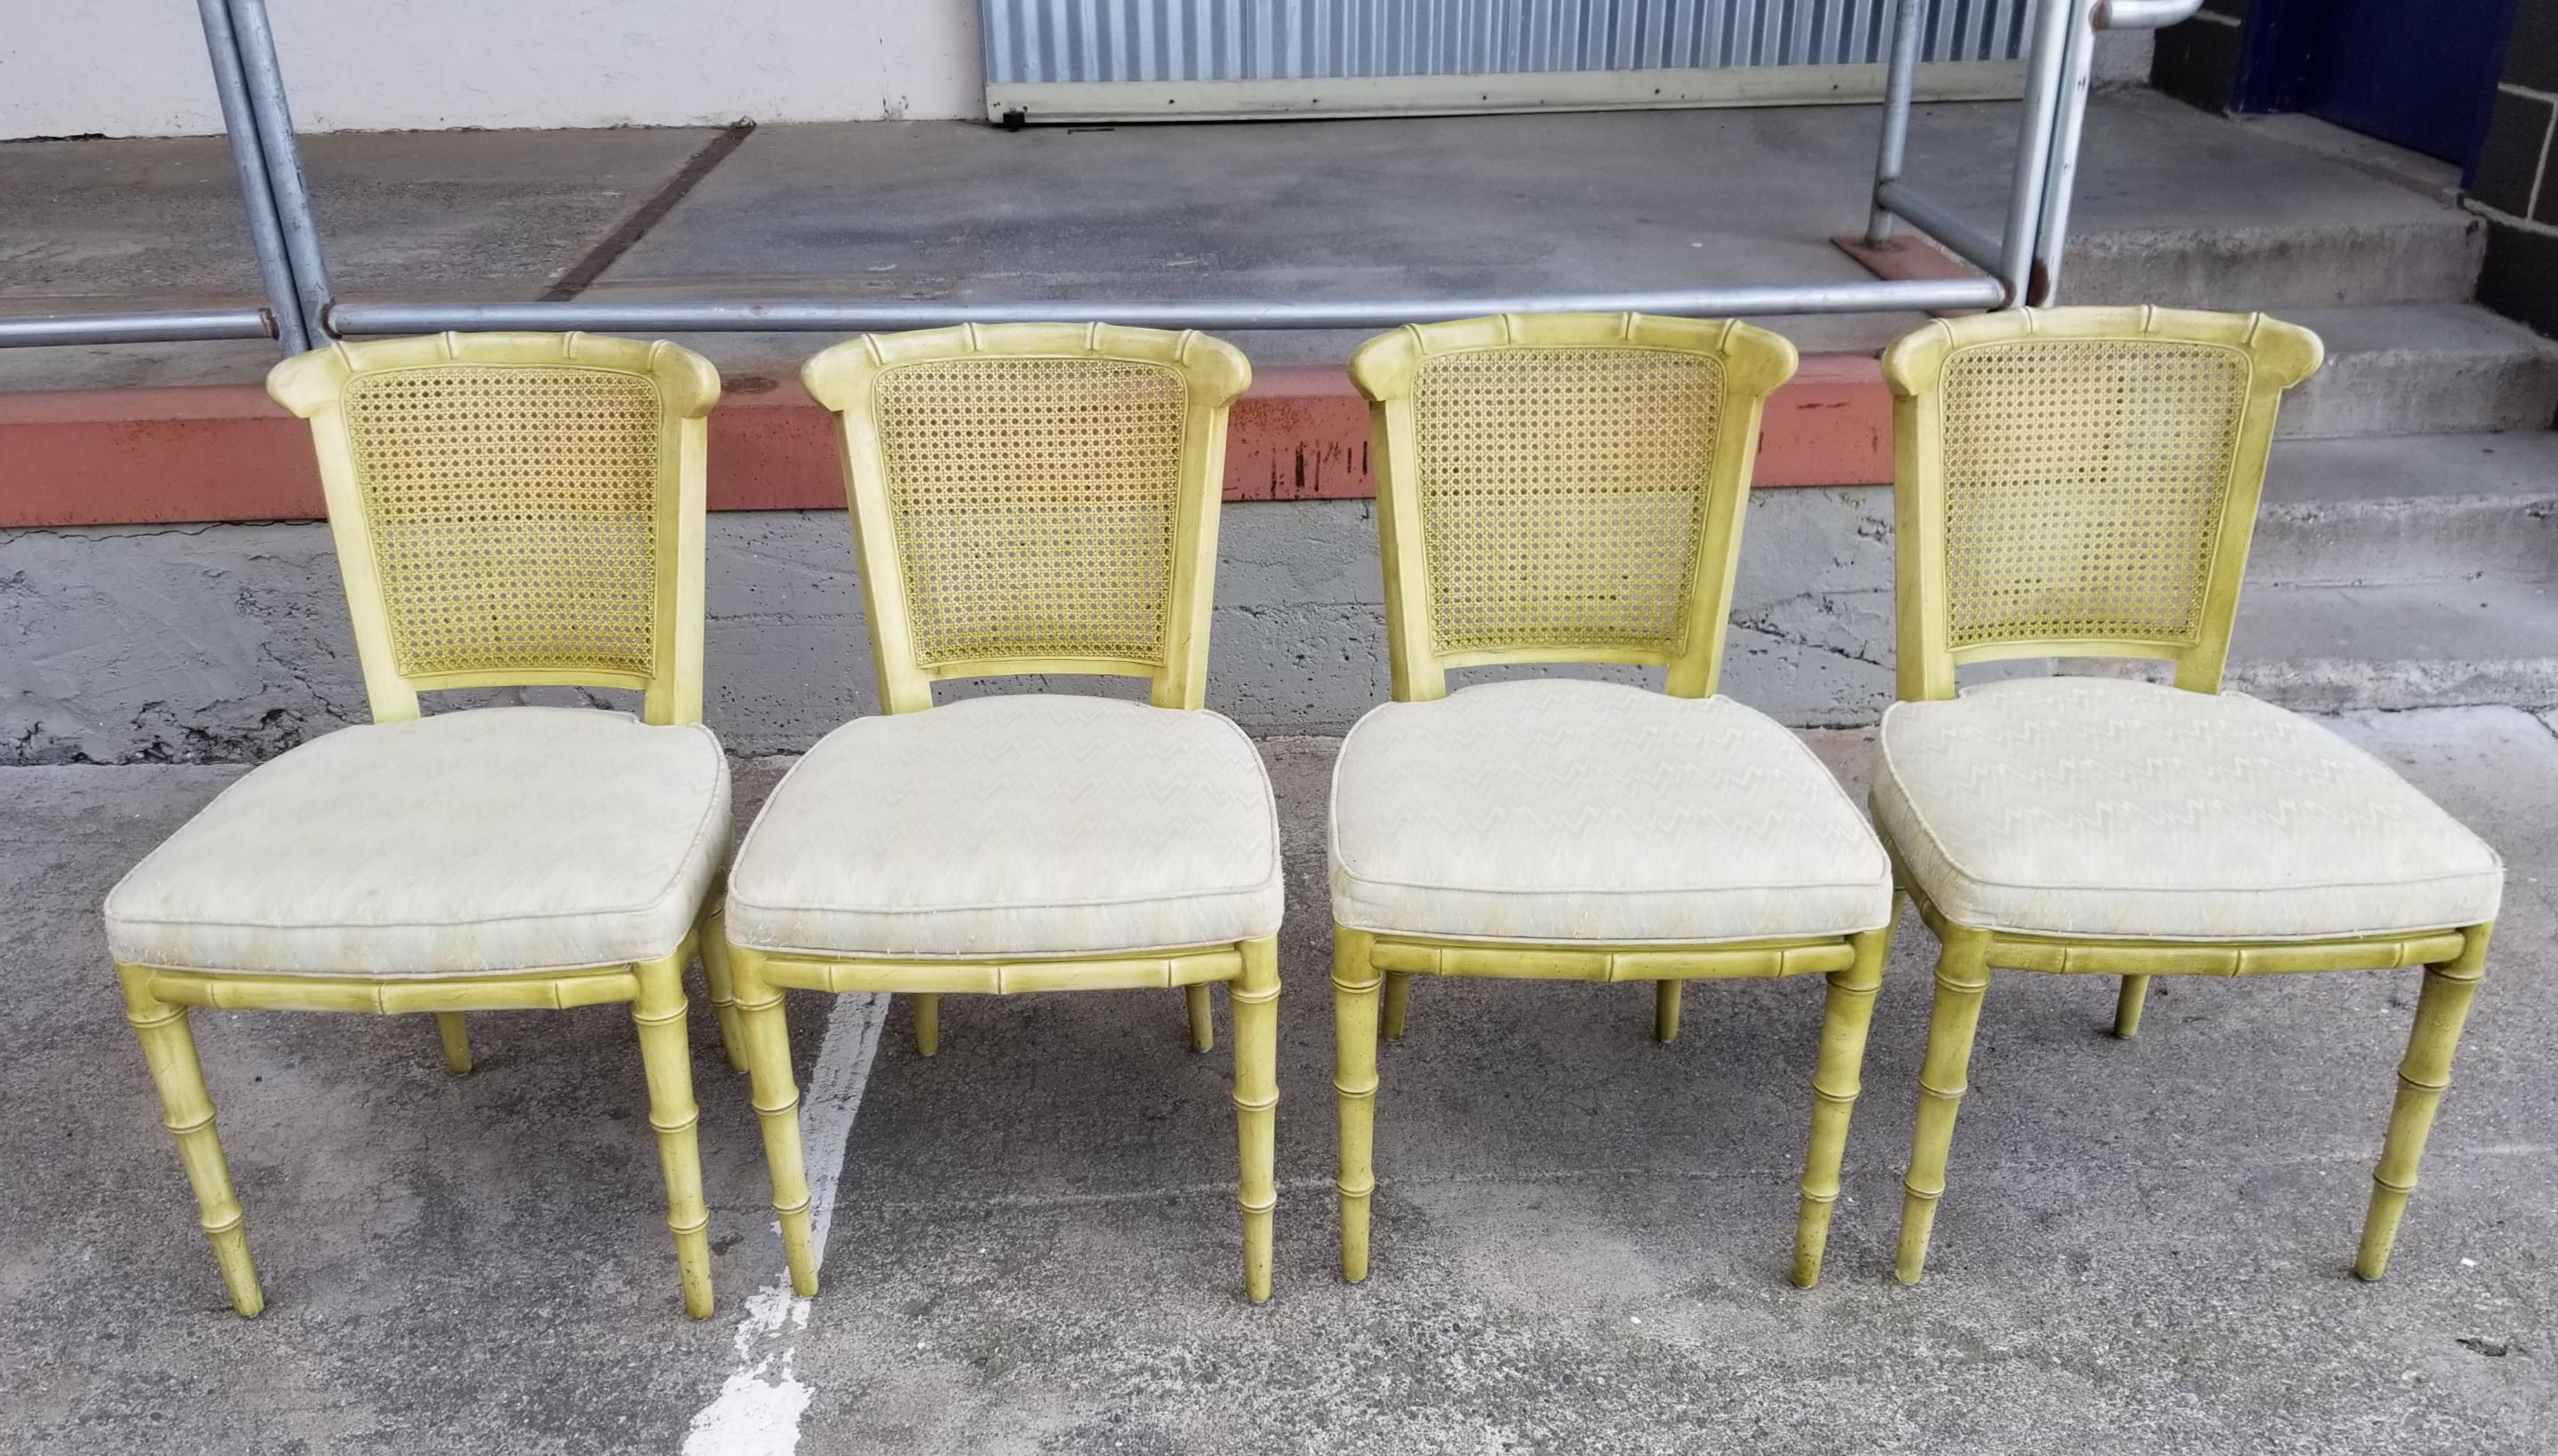 Fine quality Heneron faux bamboo dining chairs. Set consists of 4 side and 2 armchairs. Cane back with upholstered seats. Original celadon painted finish. Structurally very solid chairs, cane in excellent original condition. New upholstery